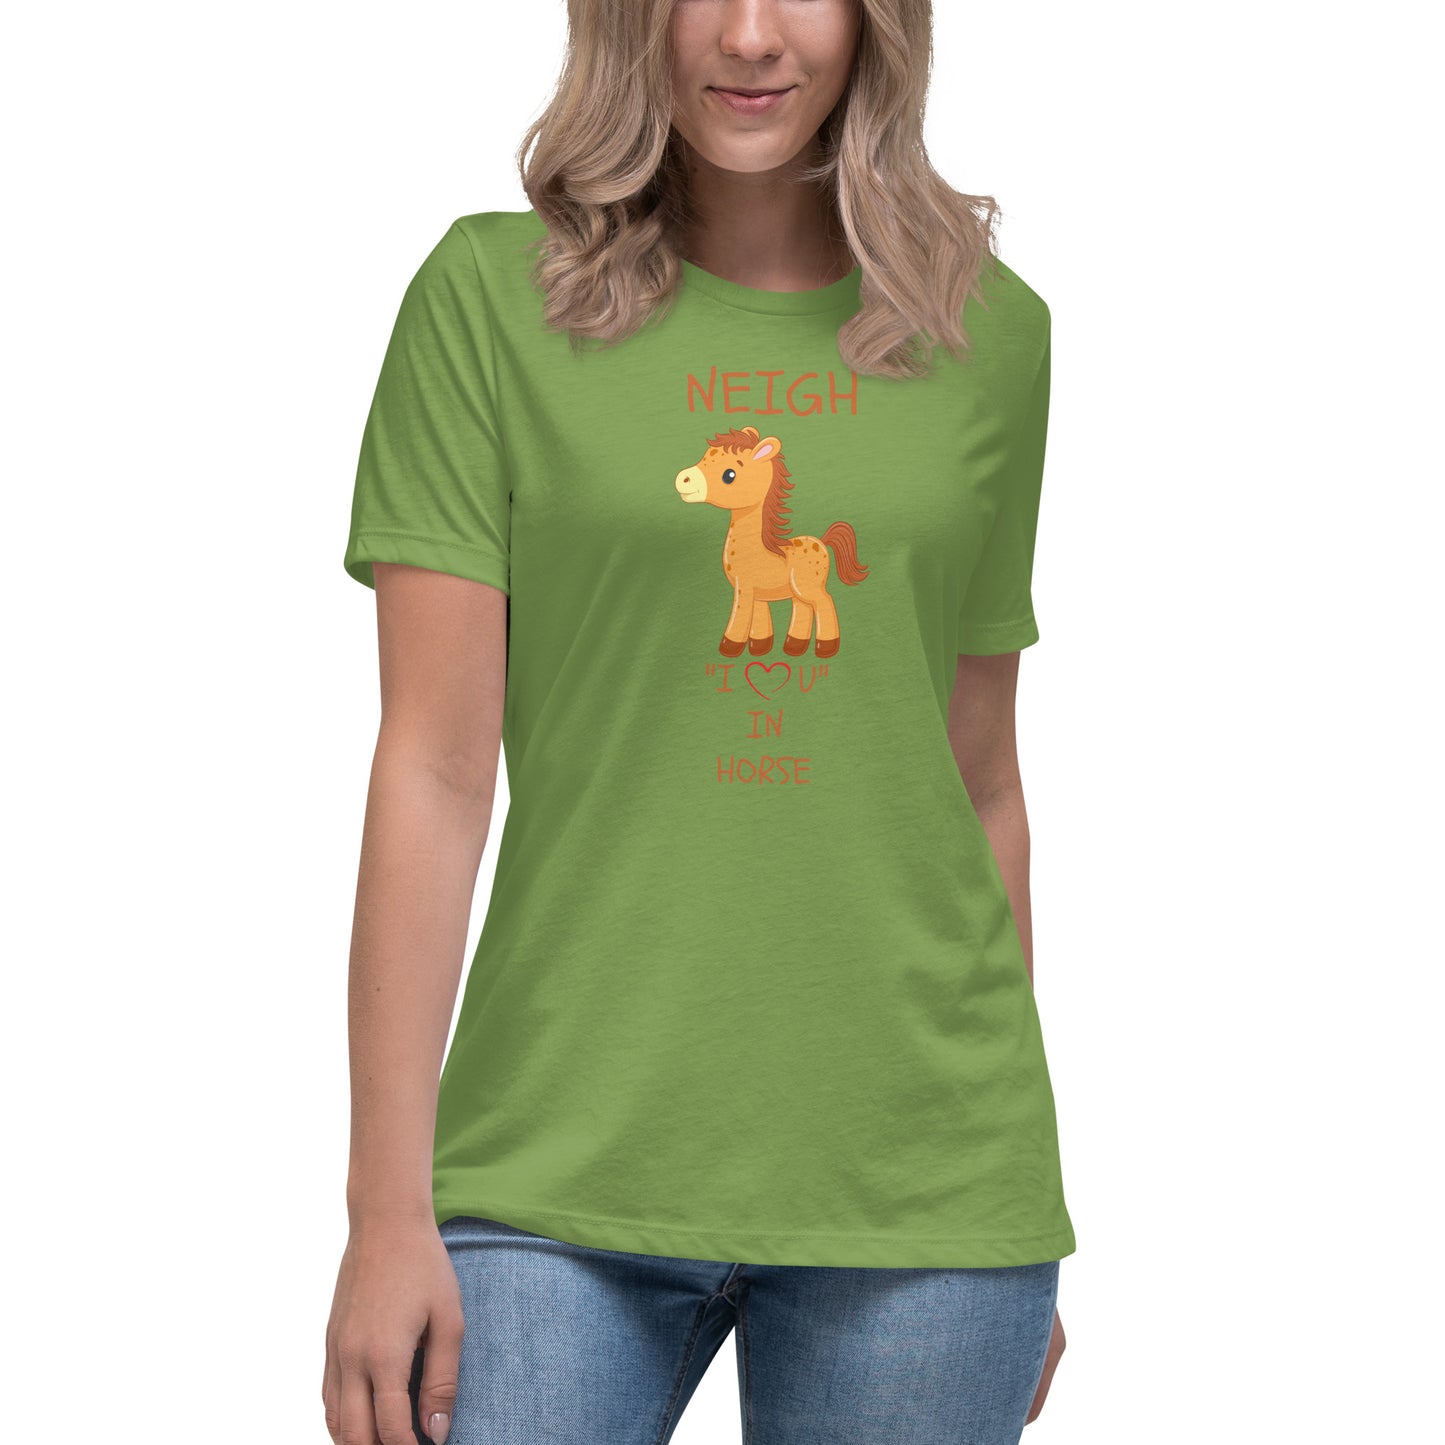 NEIGH "I LOVE U" IN HORSE Women's Relaxed T-Shirt